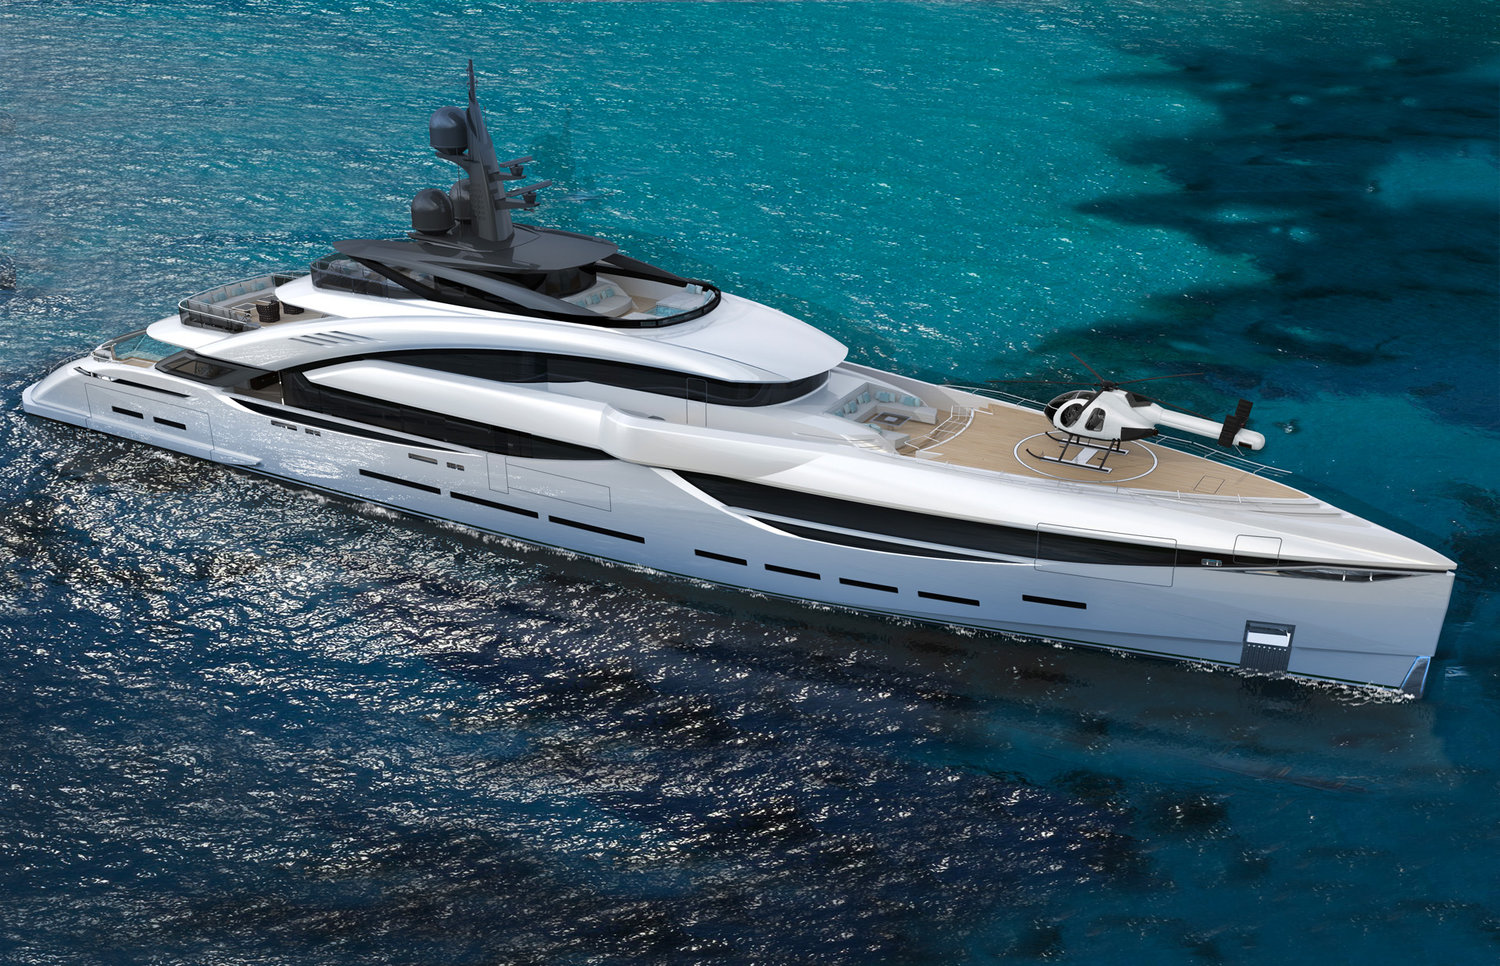 ISA Yachts and Team For Design introduce GT67 project